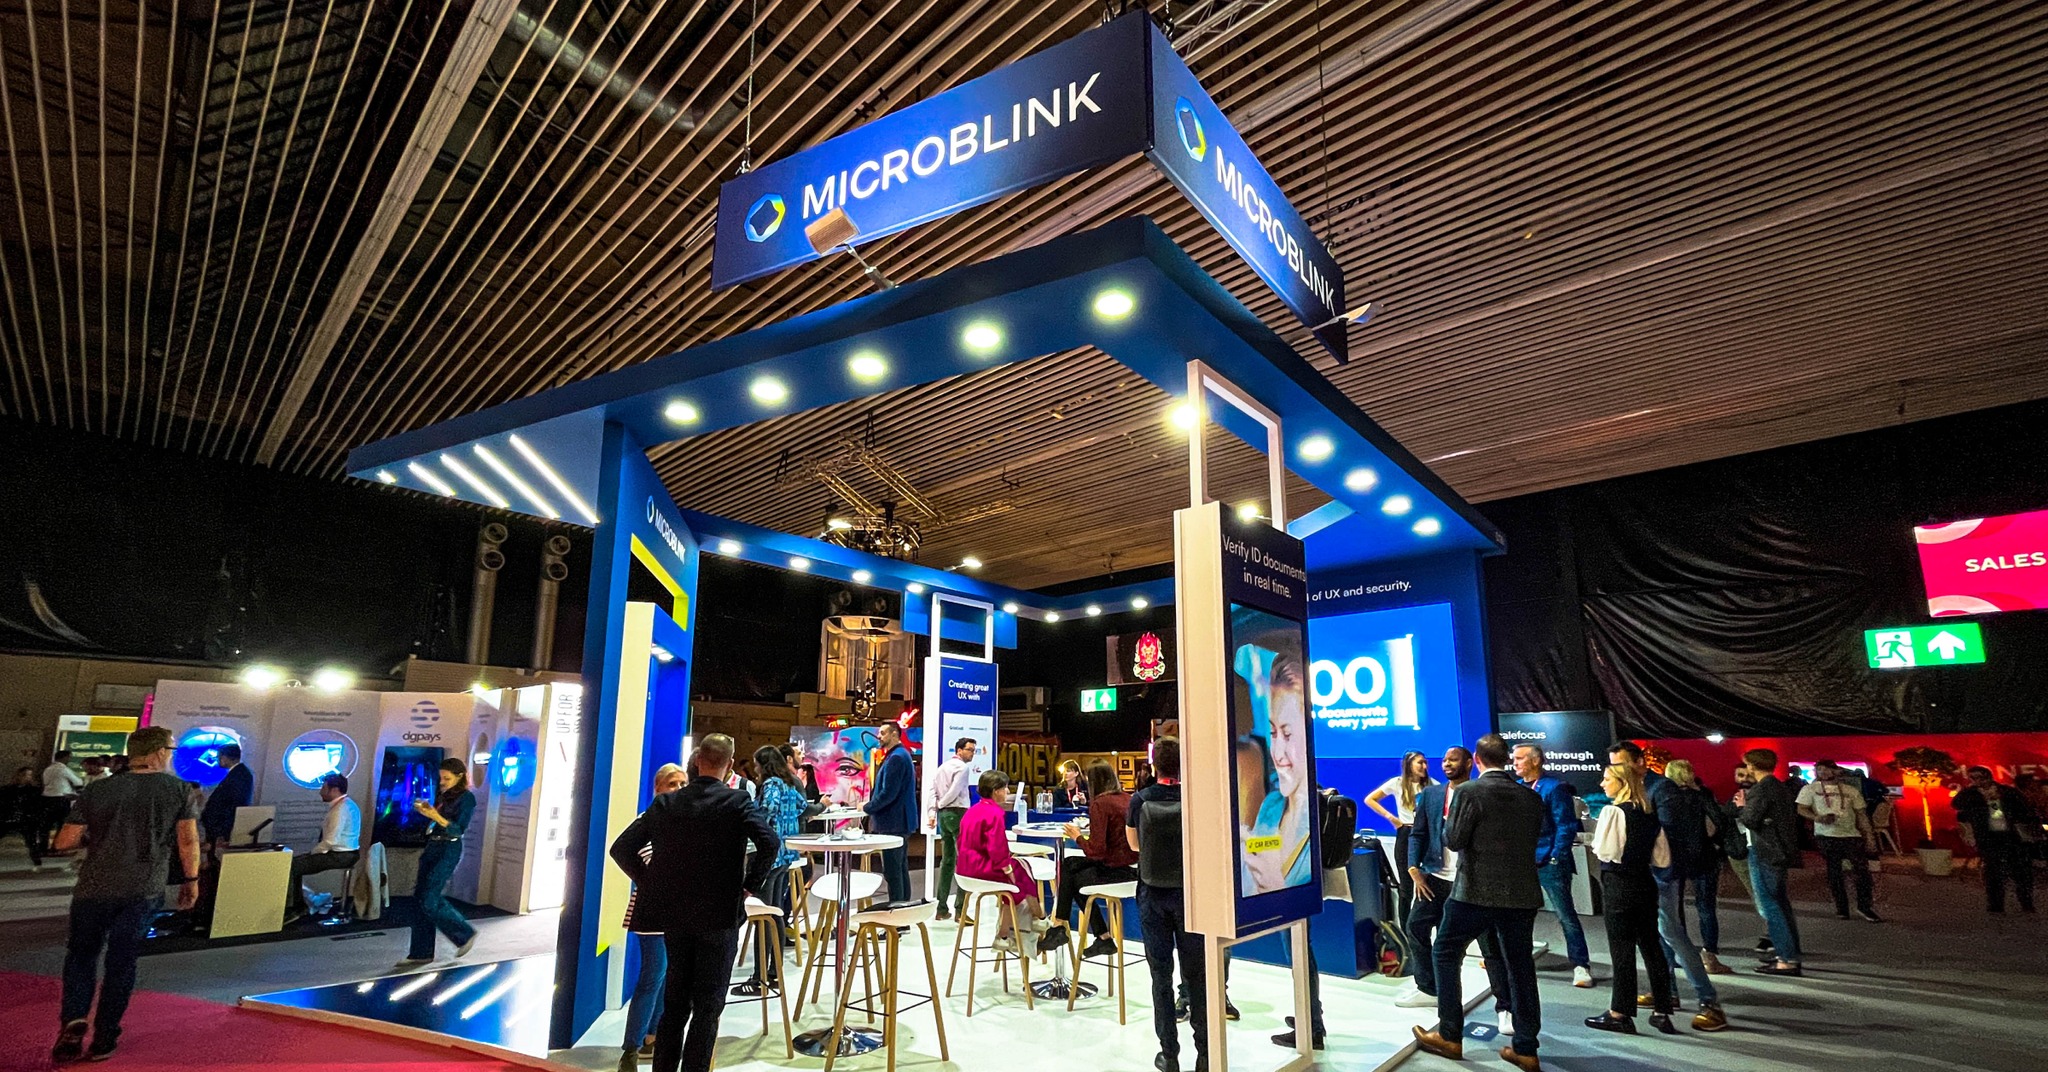 Strong Product Teams Enabling International Growth for Microblink